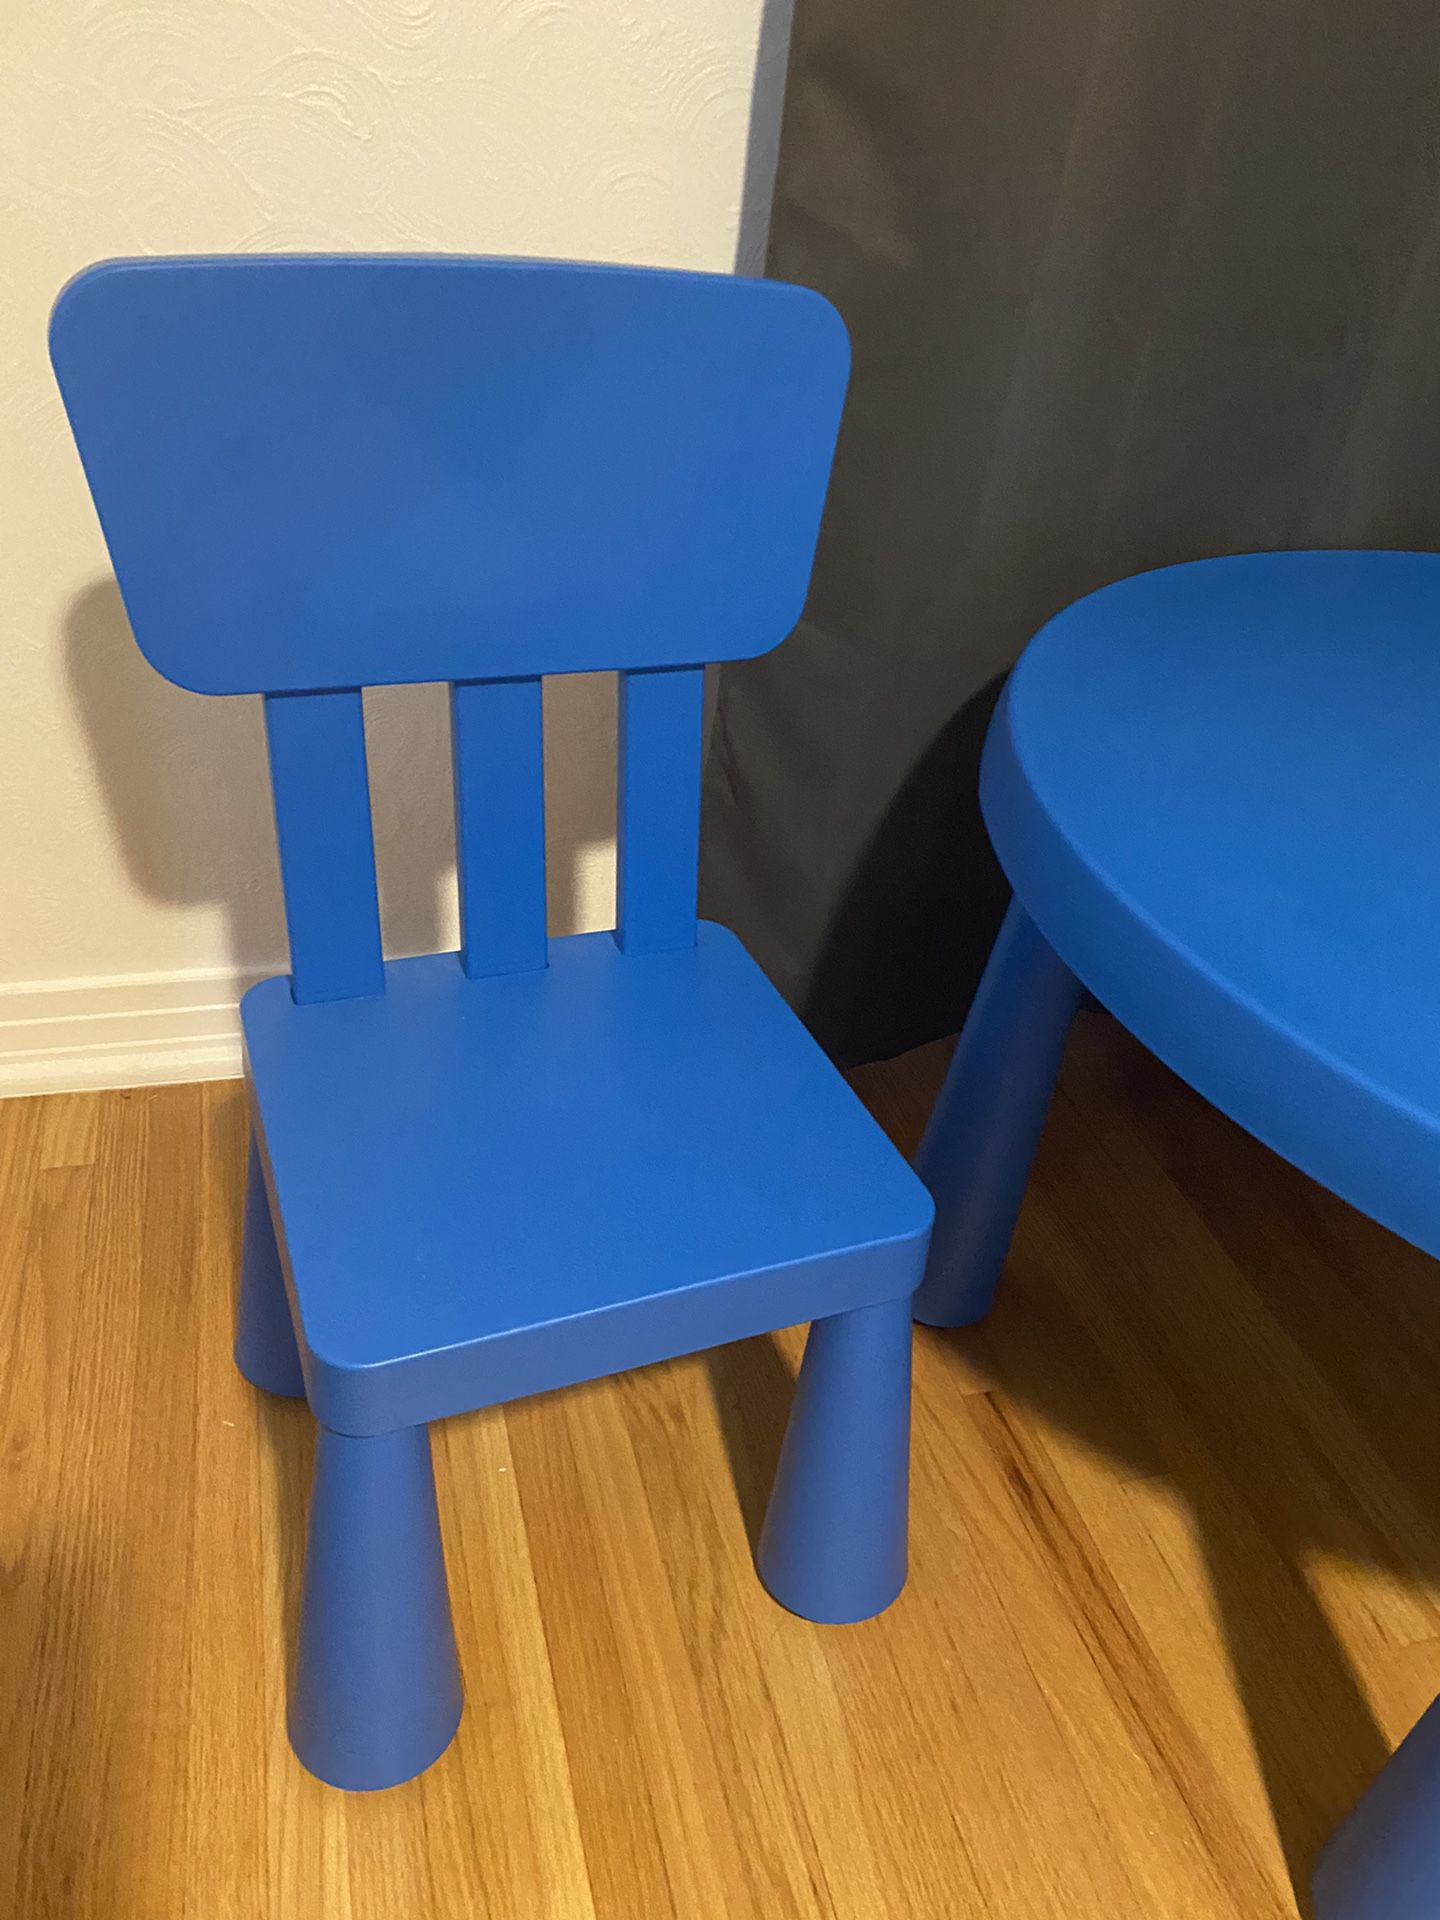 Kids Table And Chairs Set - Blue From IKEA